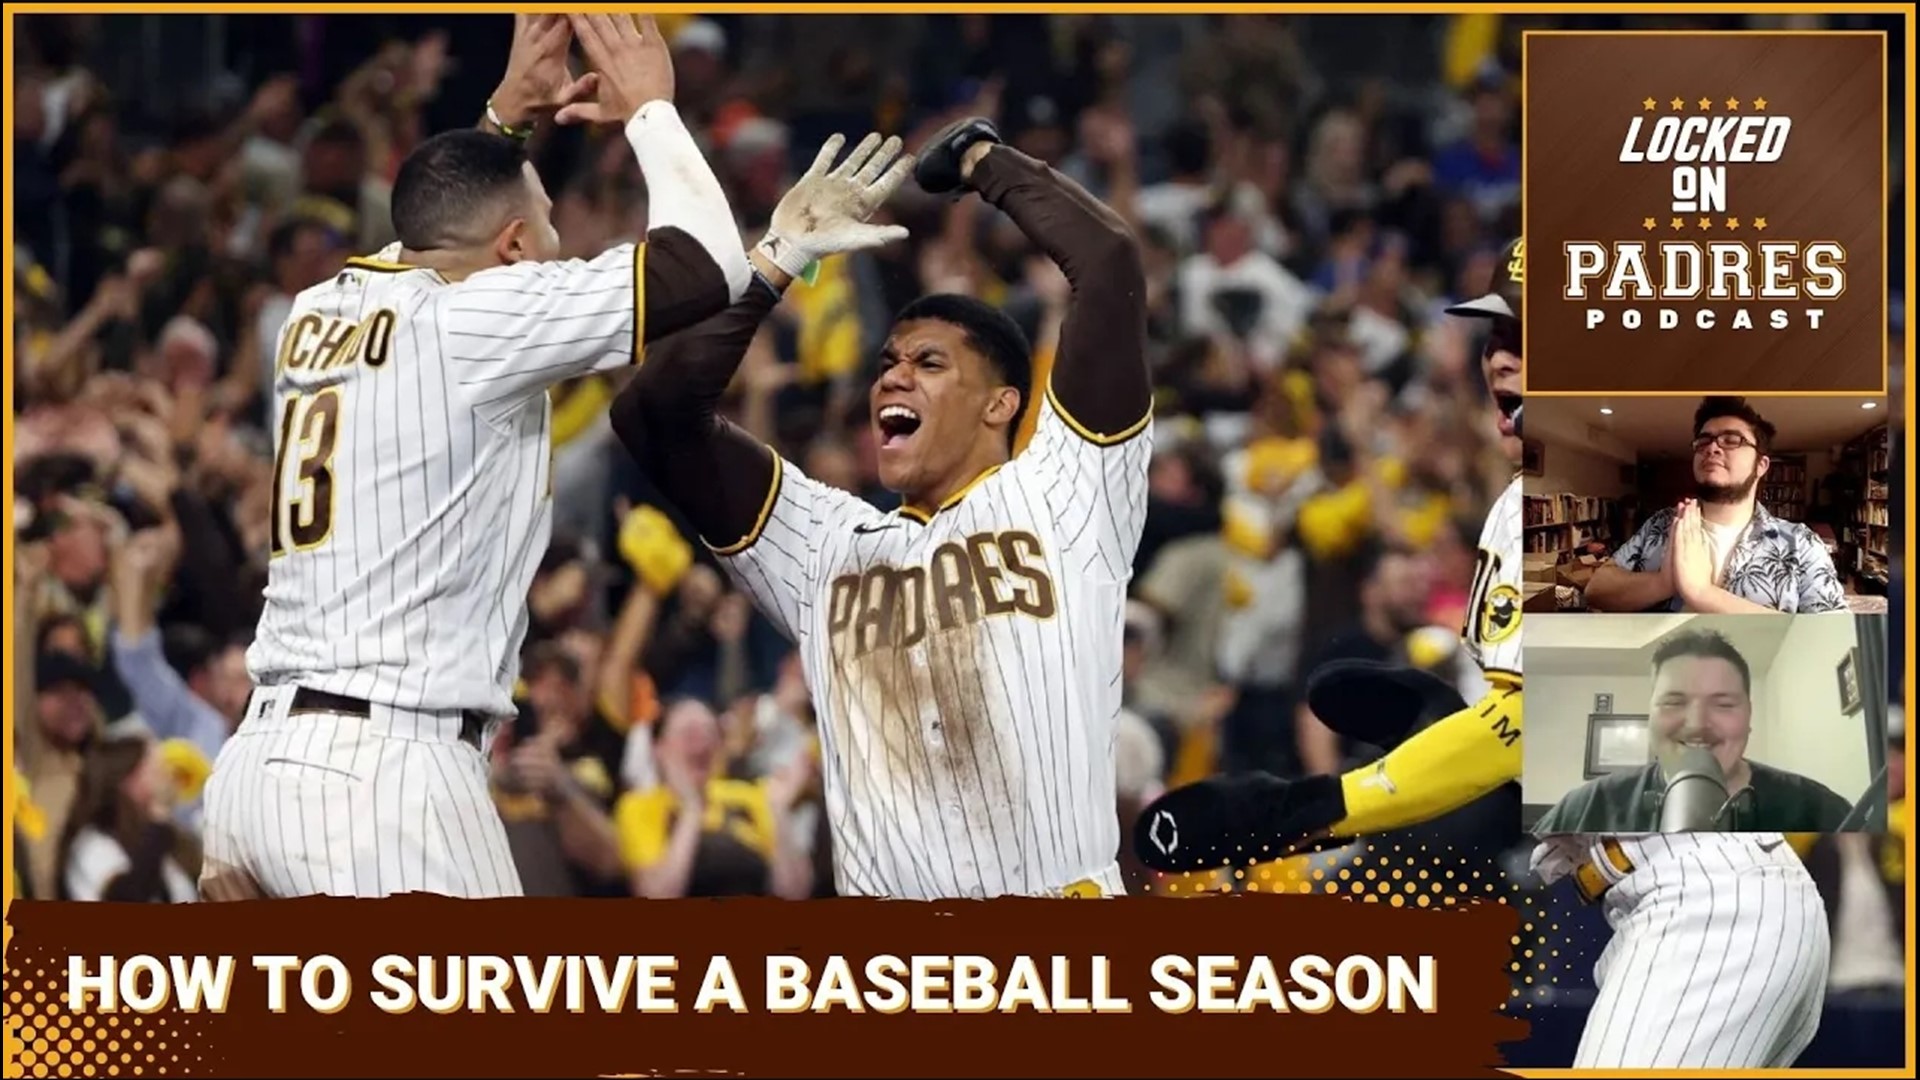 The guys discuss tips for surviving a 162-game season as a contender or as a rebuilding team and favorite moments of the last season.